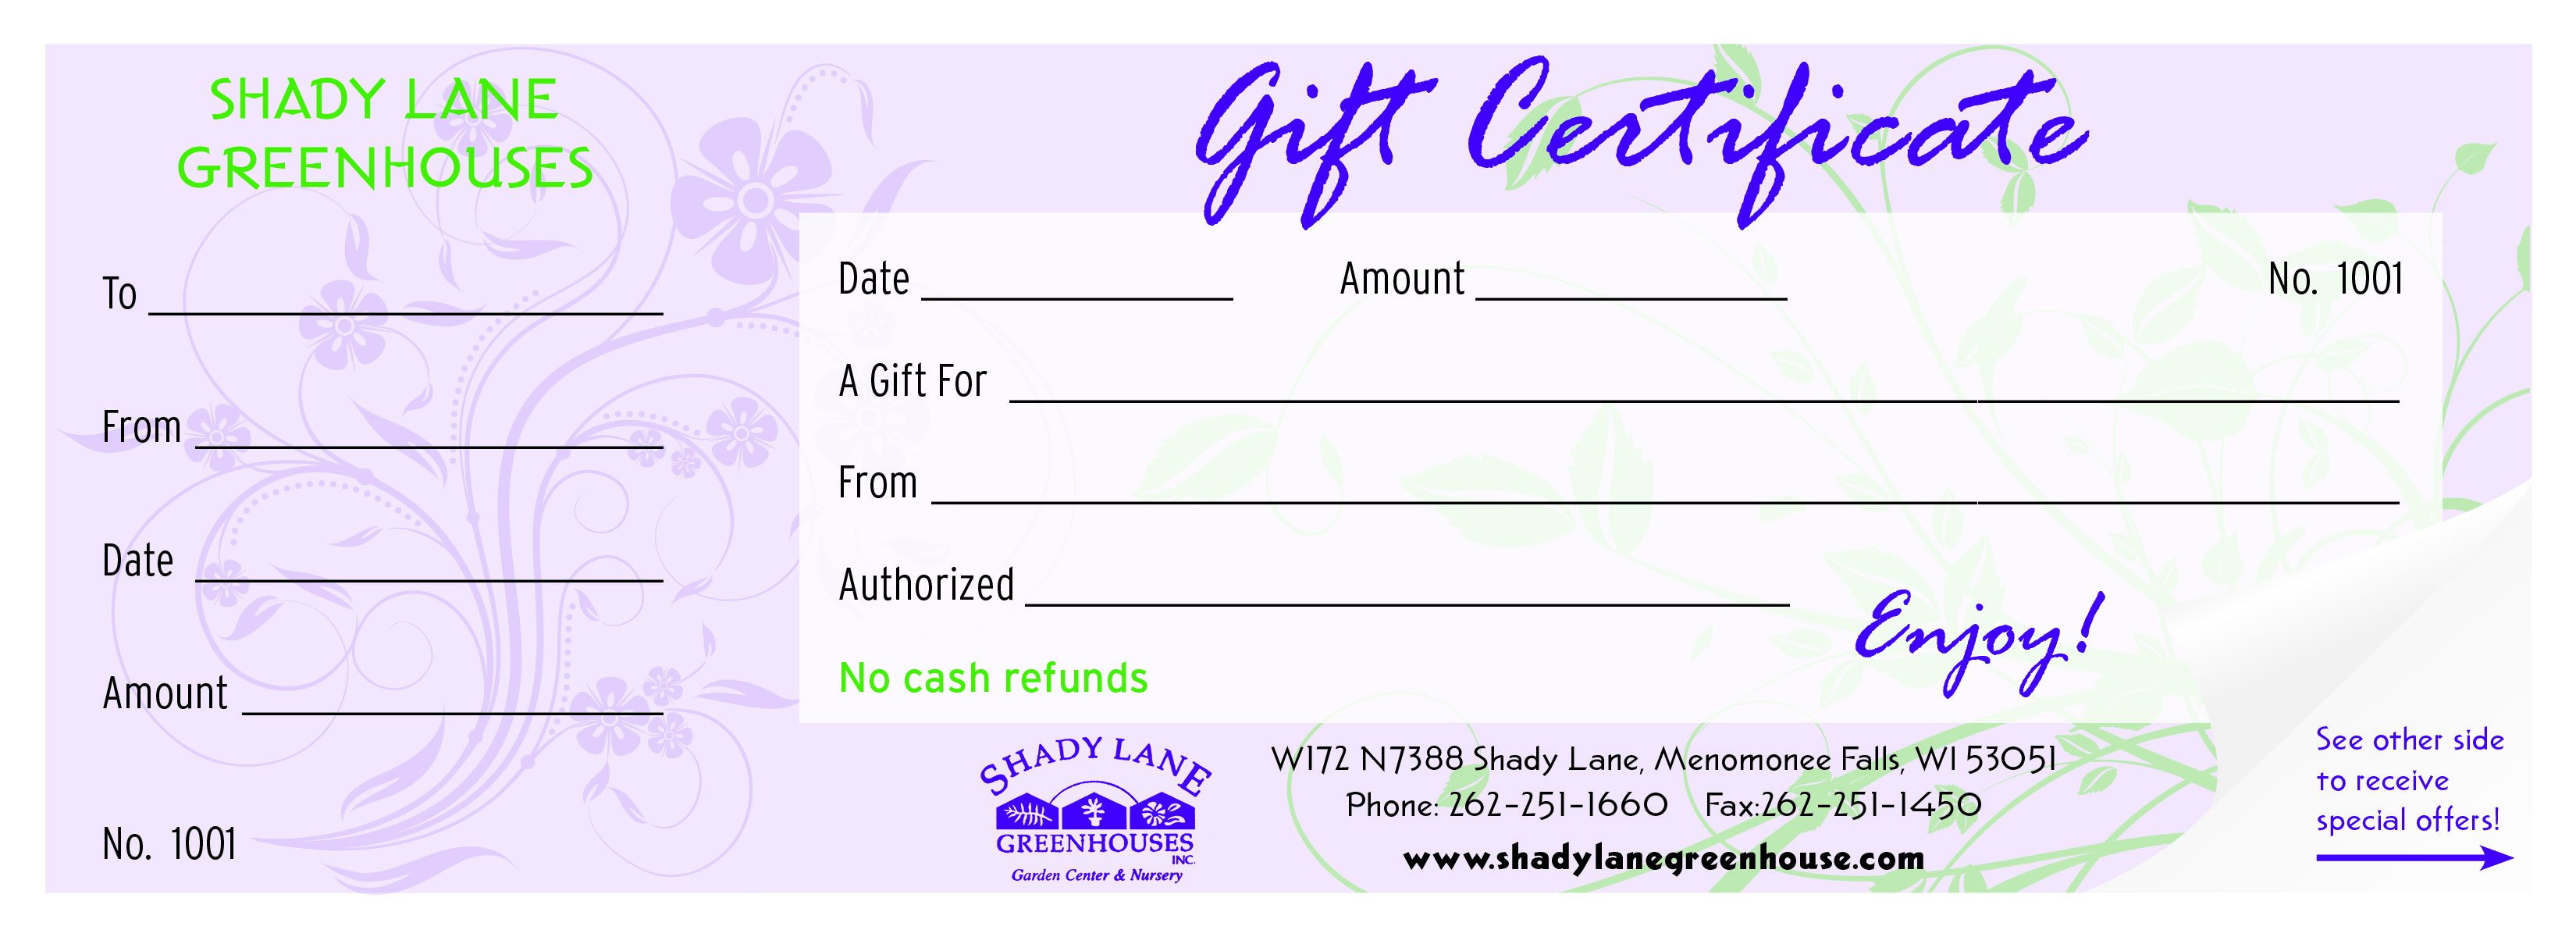 gift-certificates-coupons-shady-lane-greenhouses